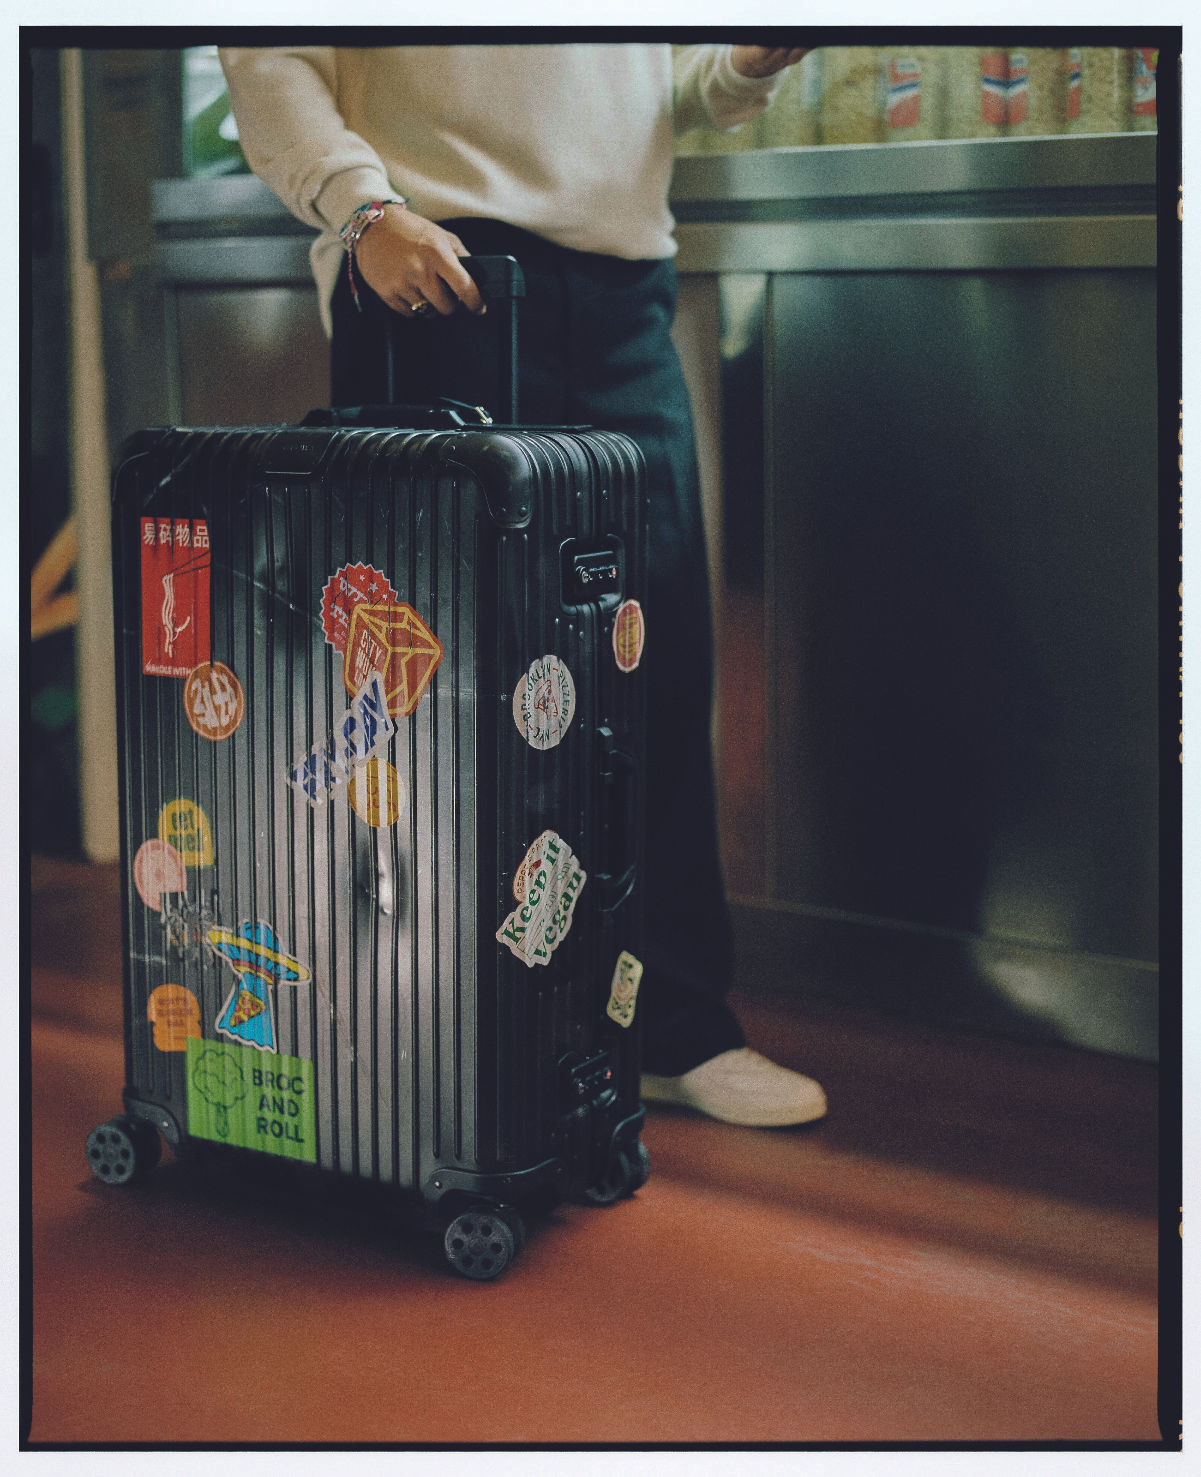 RIMOWA on X: Venture out to new places and bring the RIMOWA